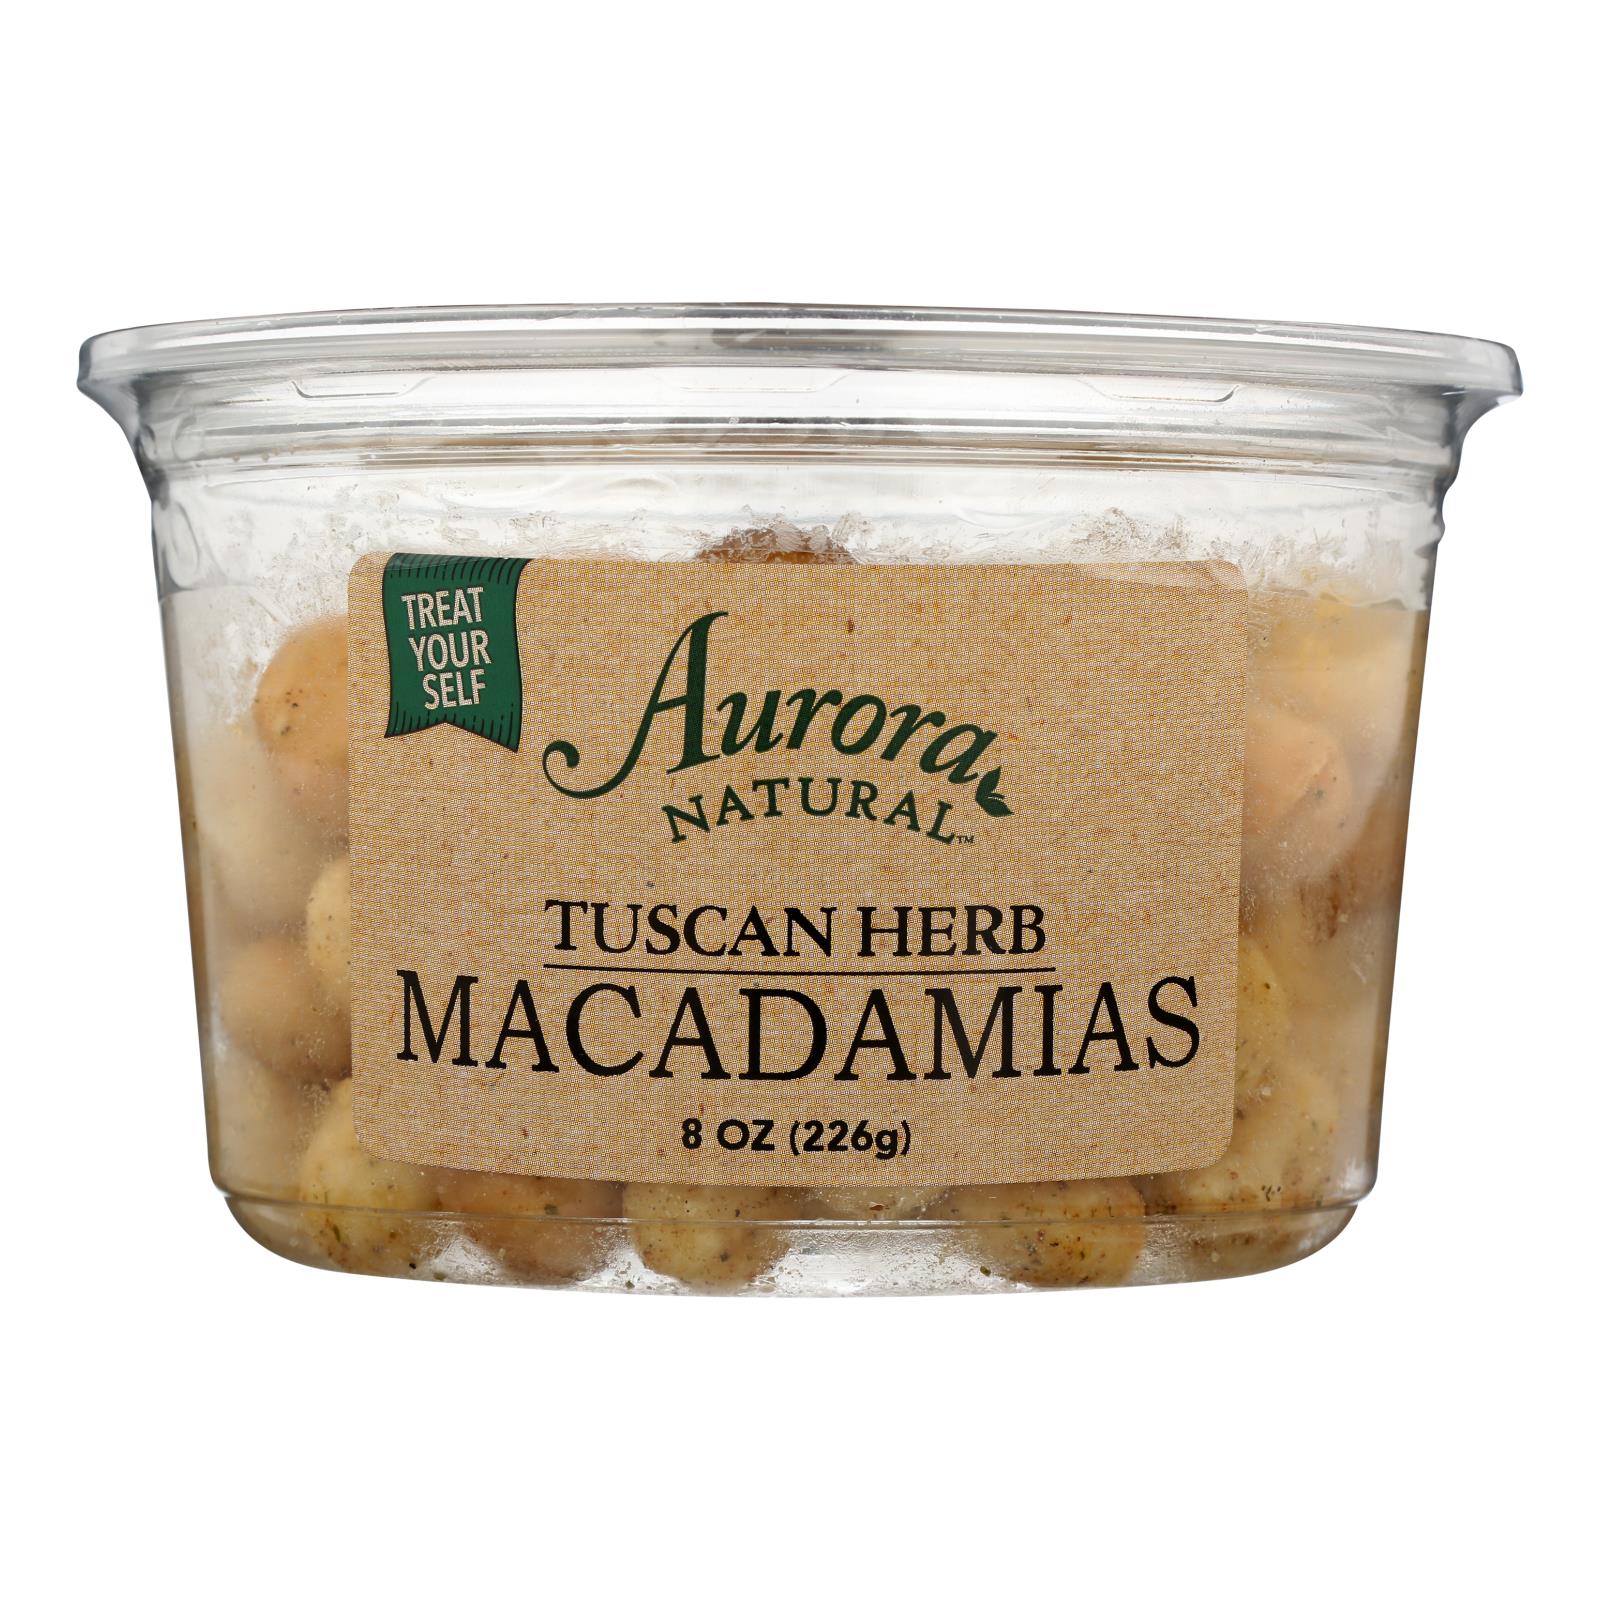 Aurora Natural Products, Aurora Natural Products - Macadamia Nuts Tuscan Herbal - Case of 12 - 8 OZ (Pack of 12)